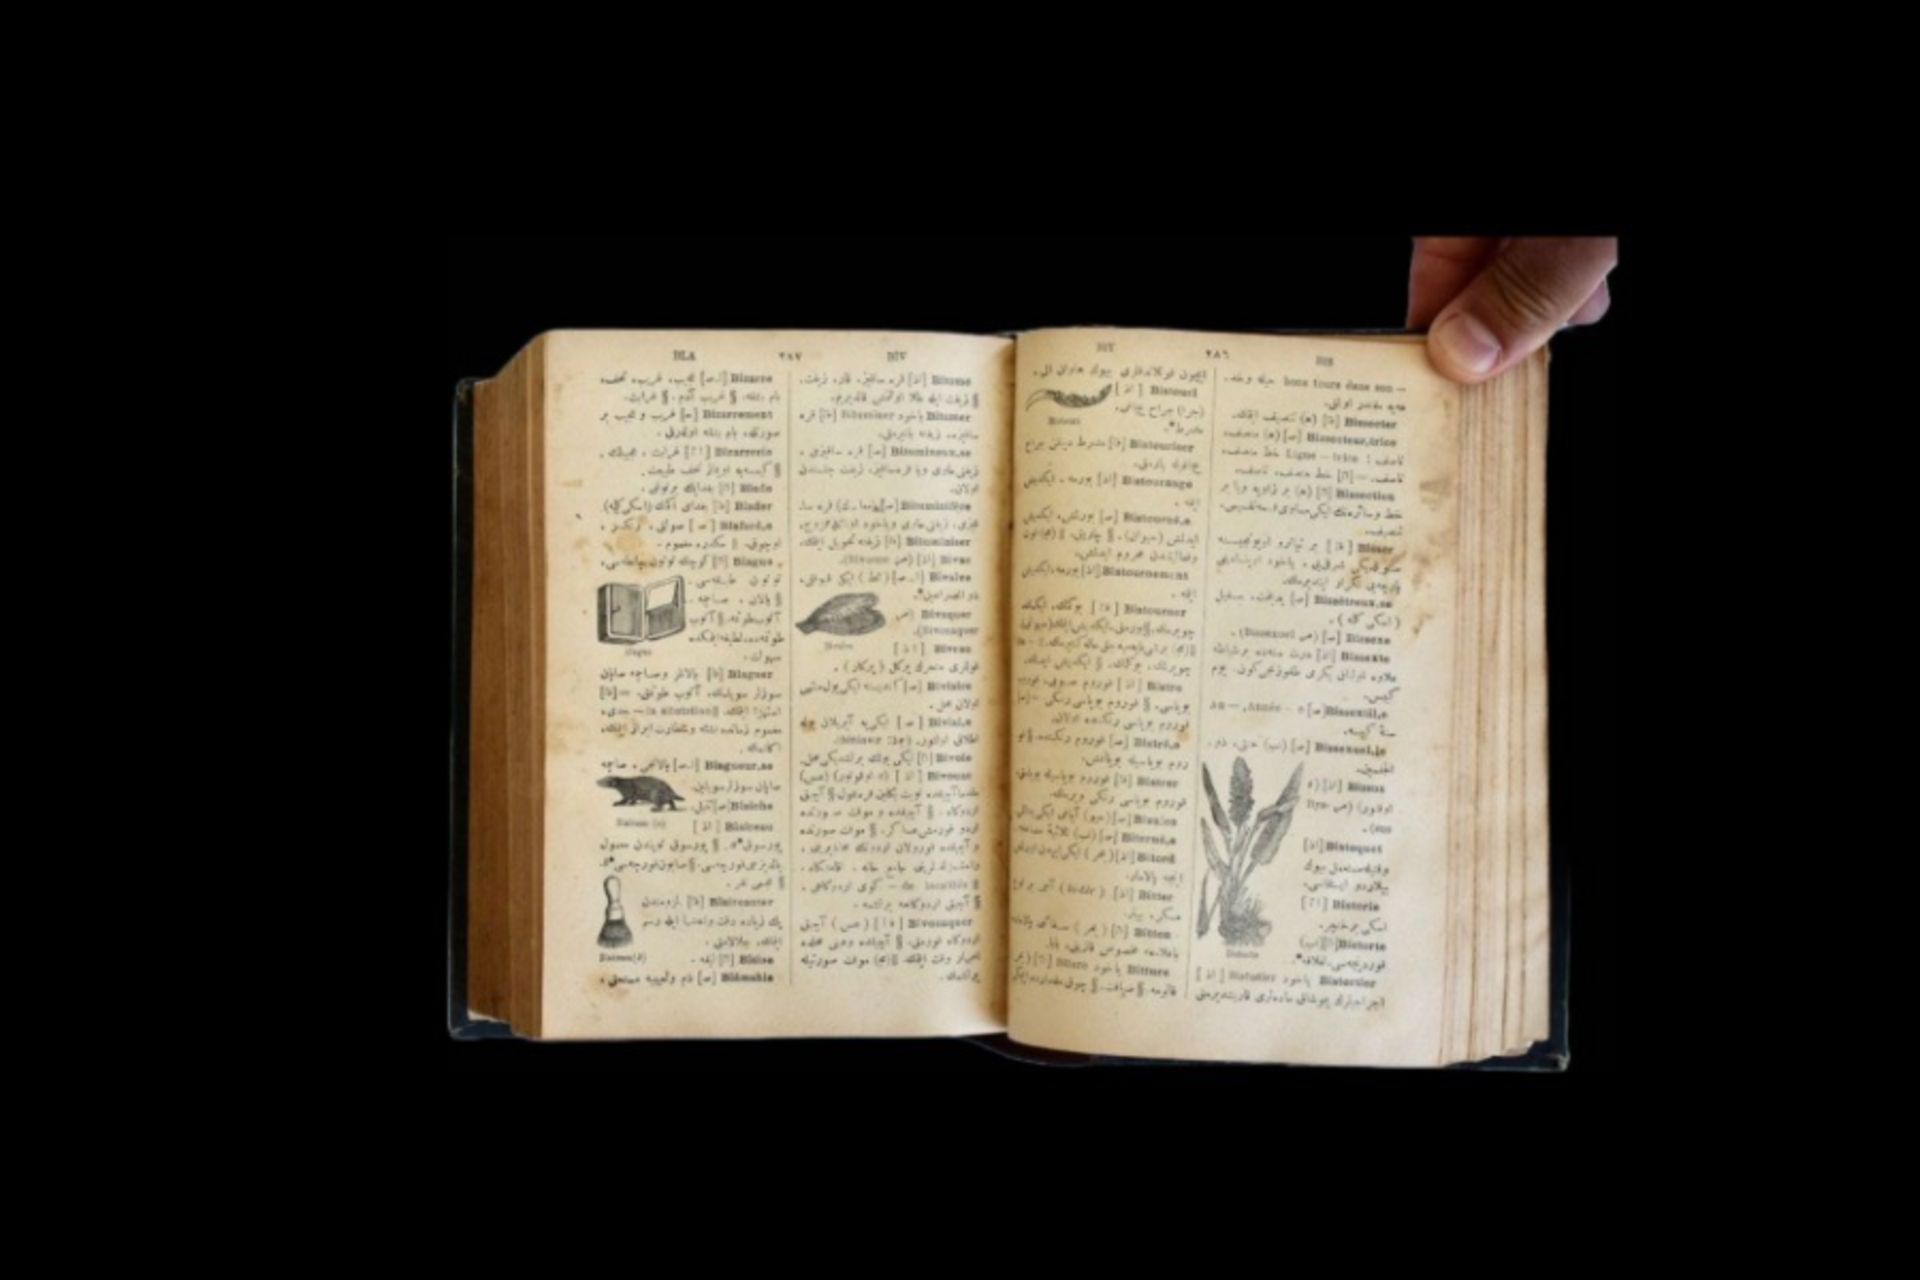 19th century French - Ottoman dictionary - Image 10 of 19